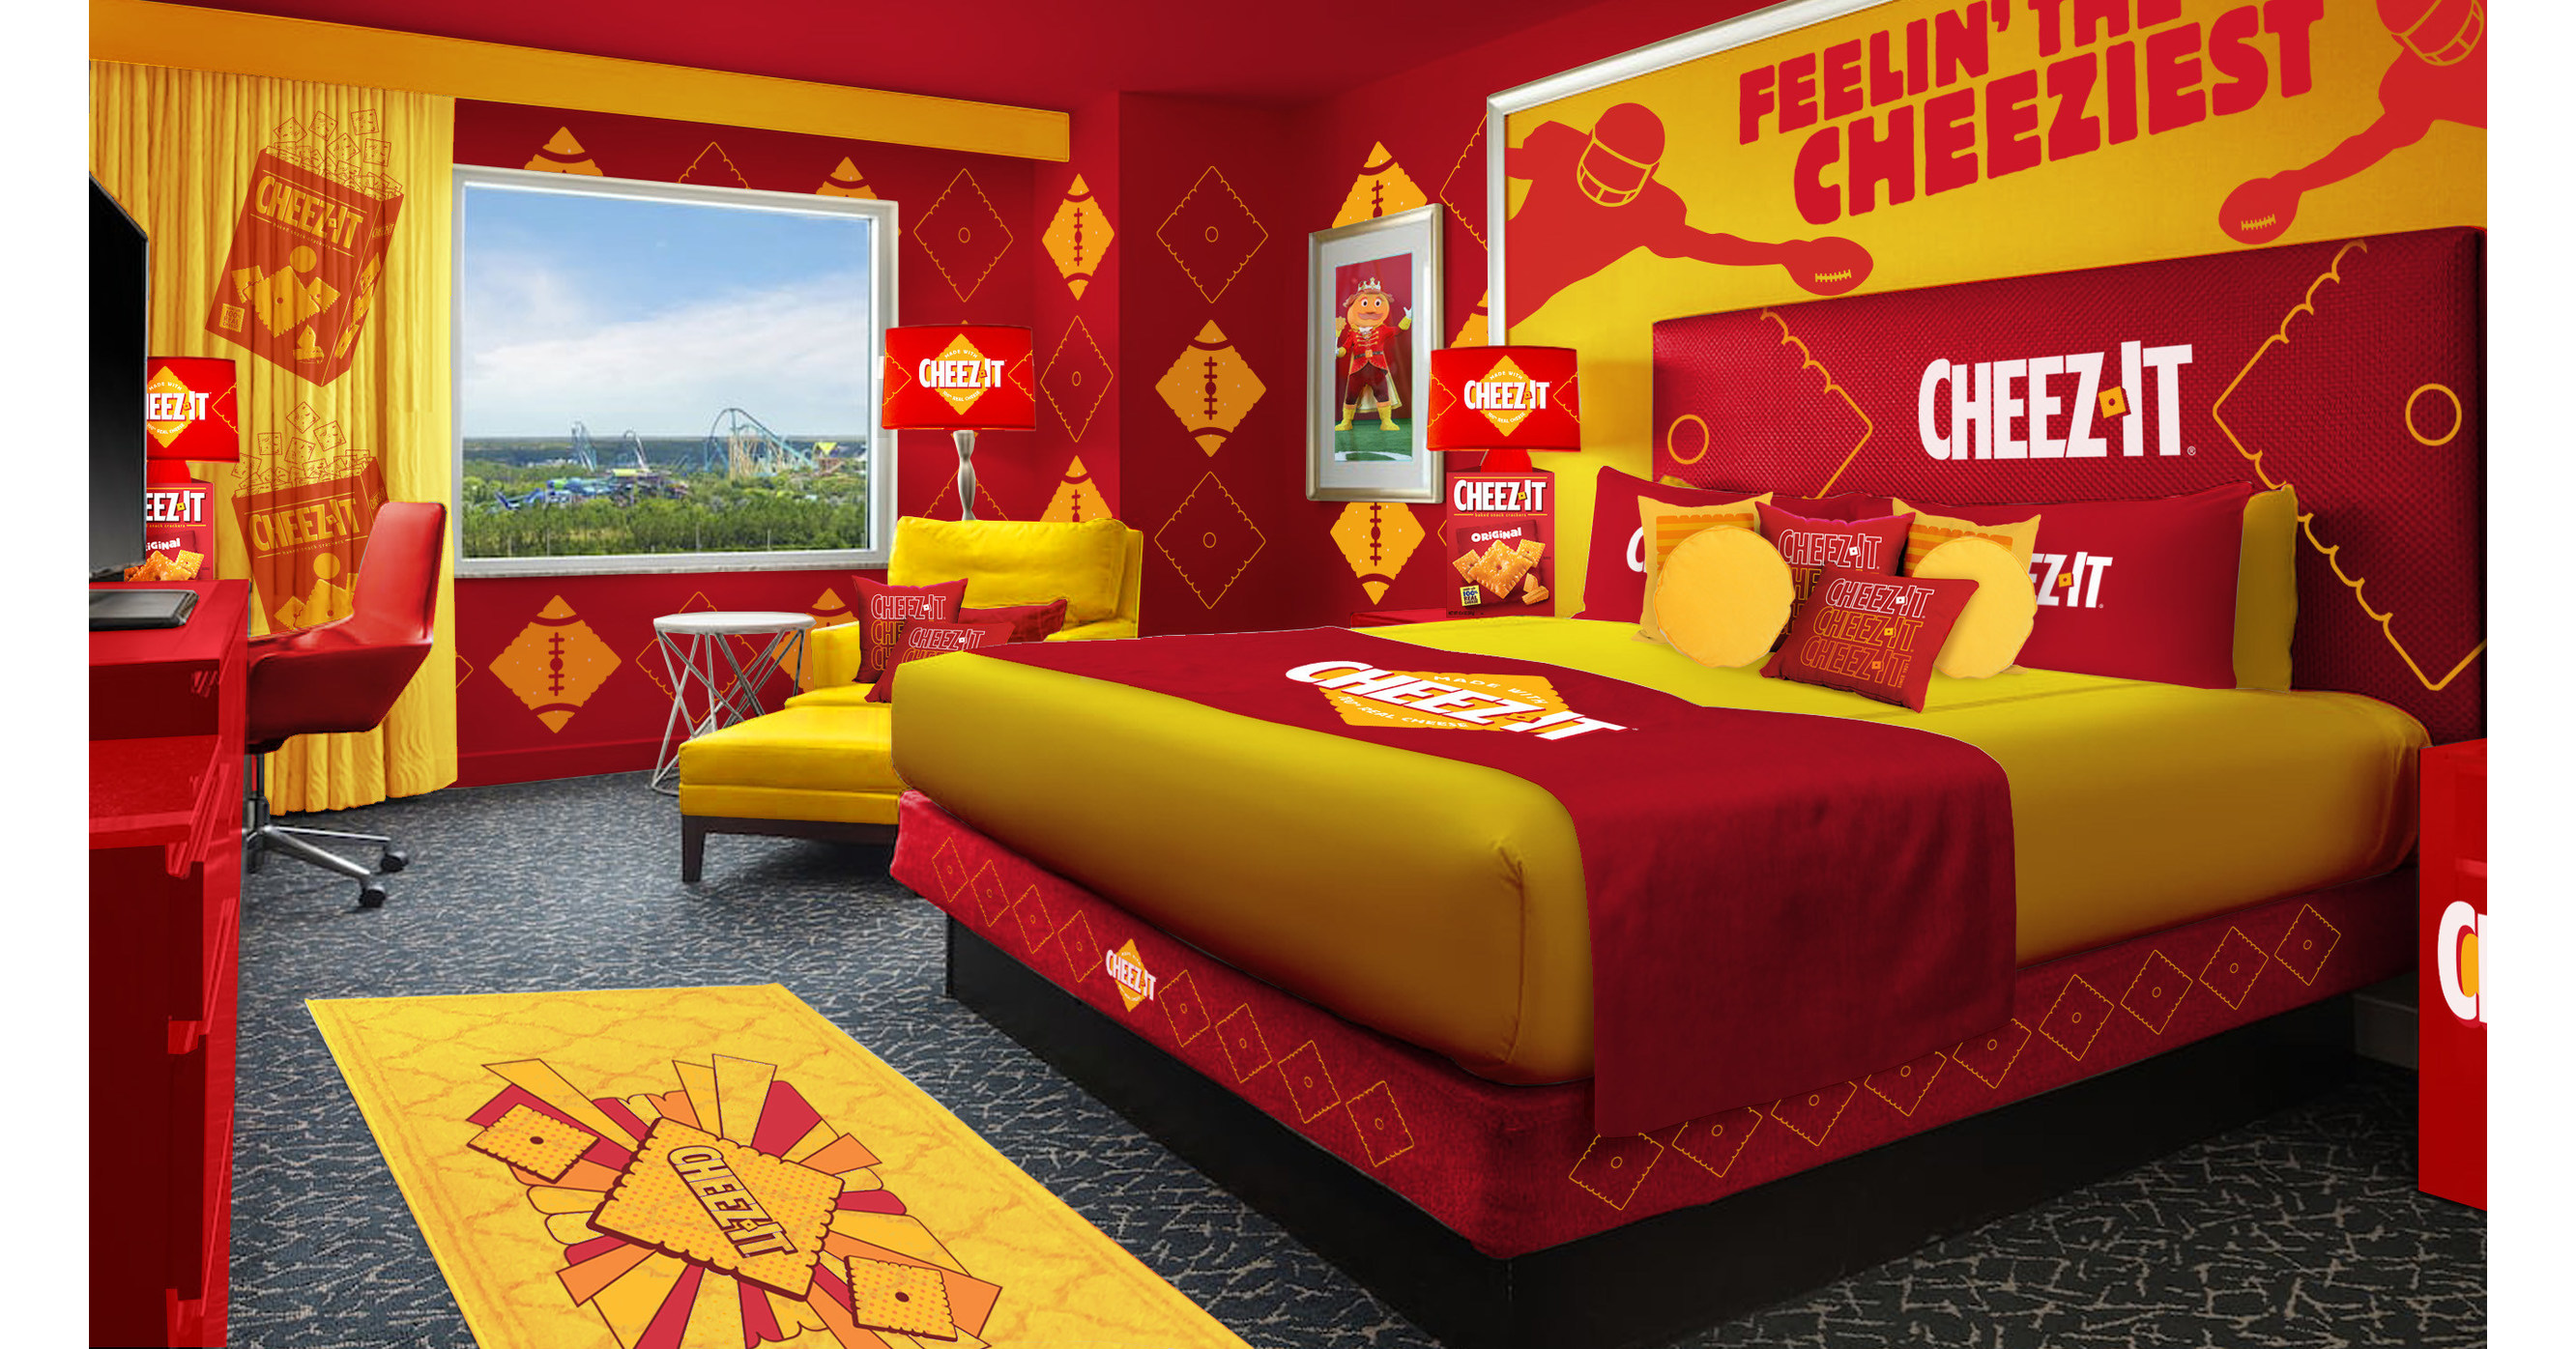 CHEEZ-IT® WANTS FOOTBALL PLAYERS AND FANS TO WAKE UP 'FEELIN' THE CHEEZIEST' AT THIS SEASON'S CHEEZ-IT BOWL AND NEW CHEEZ-IT CITRUS BOWL